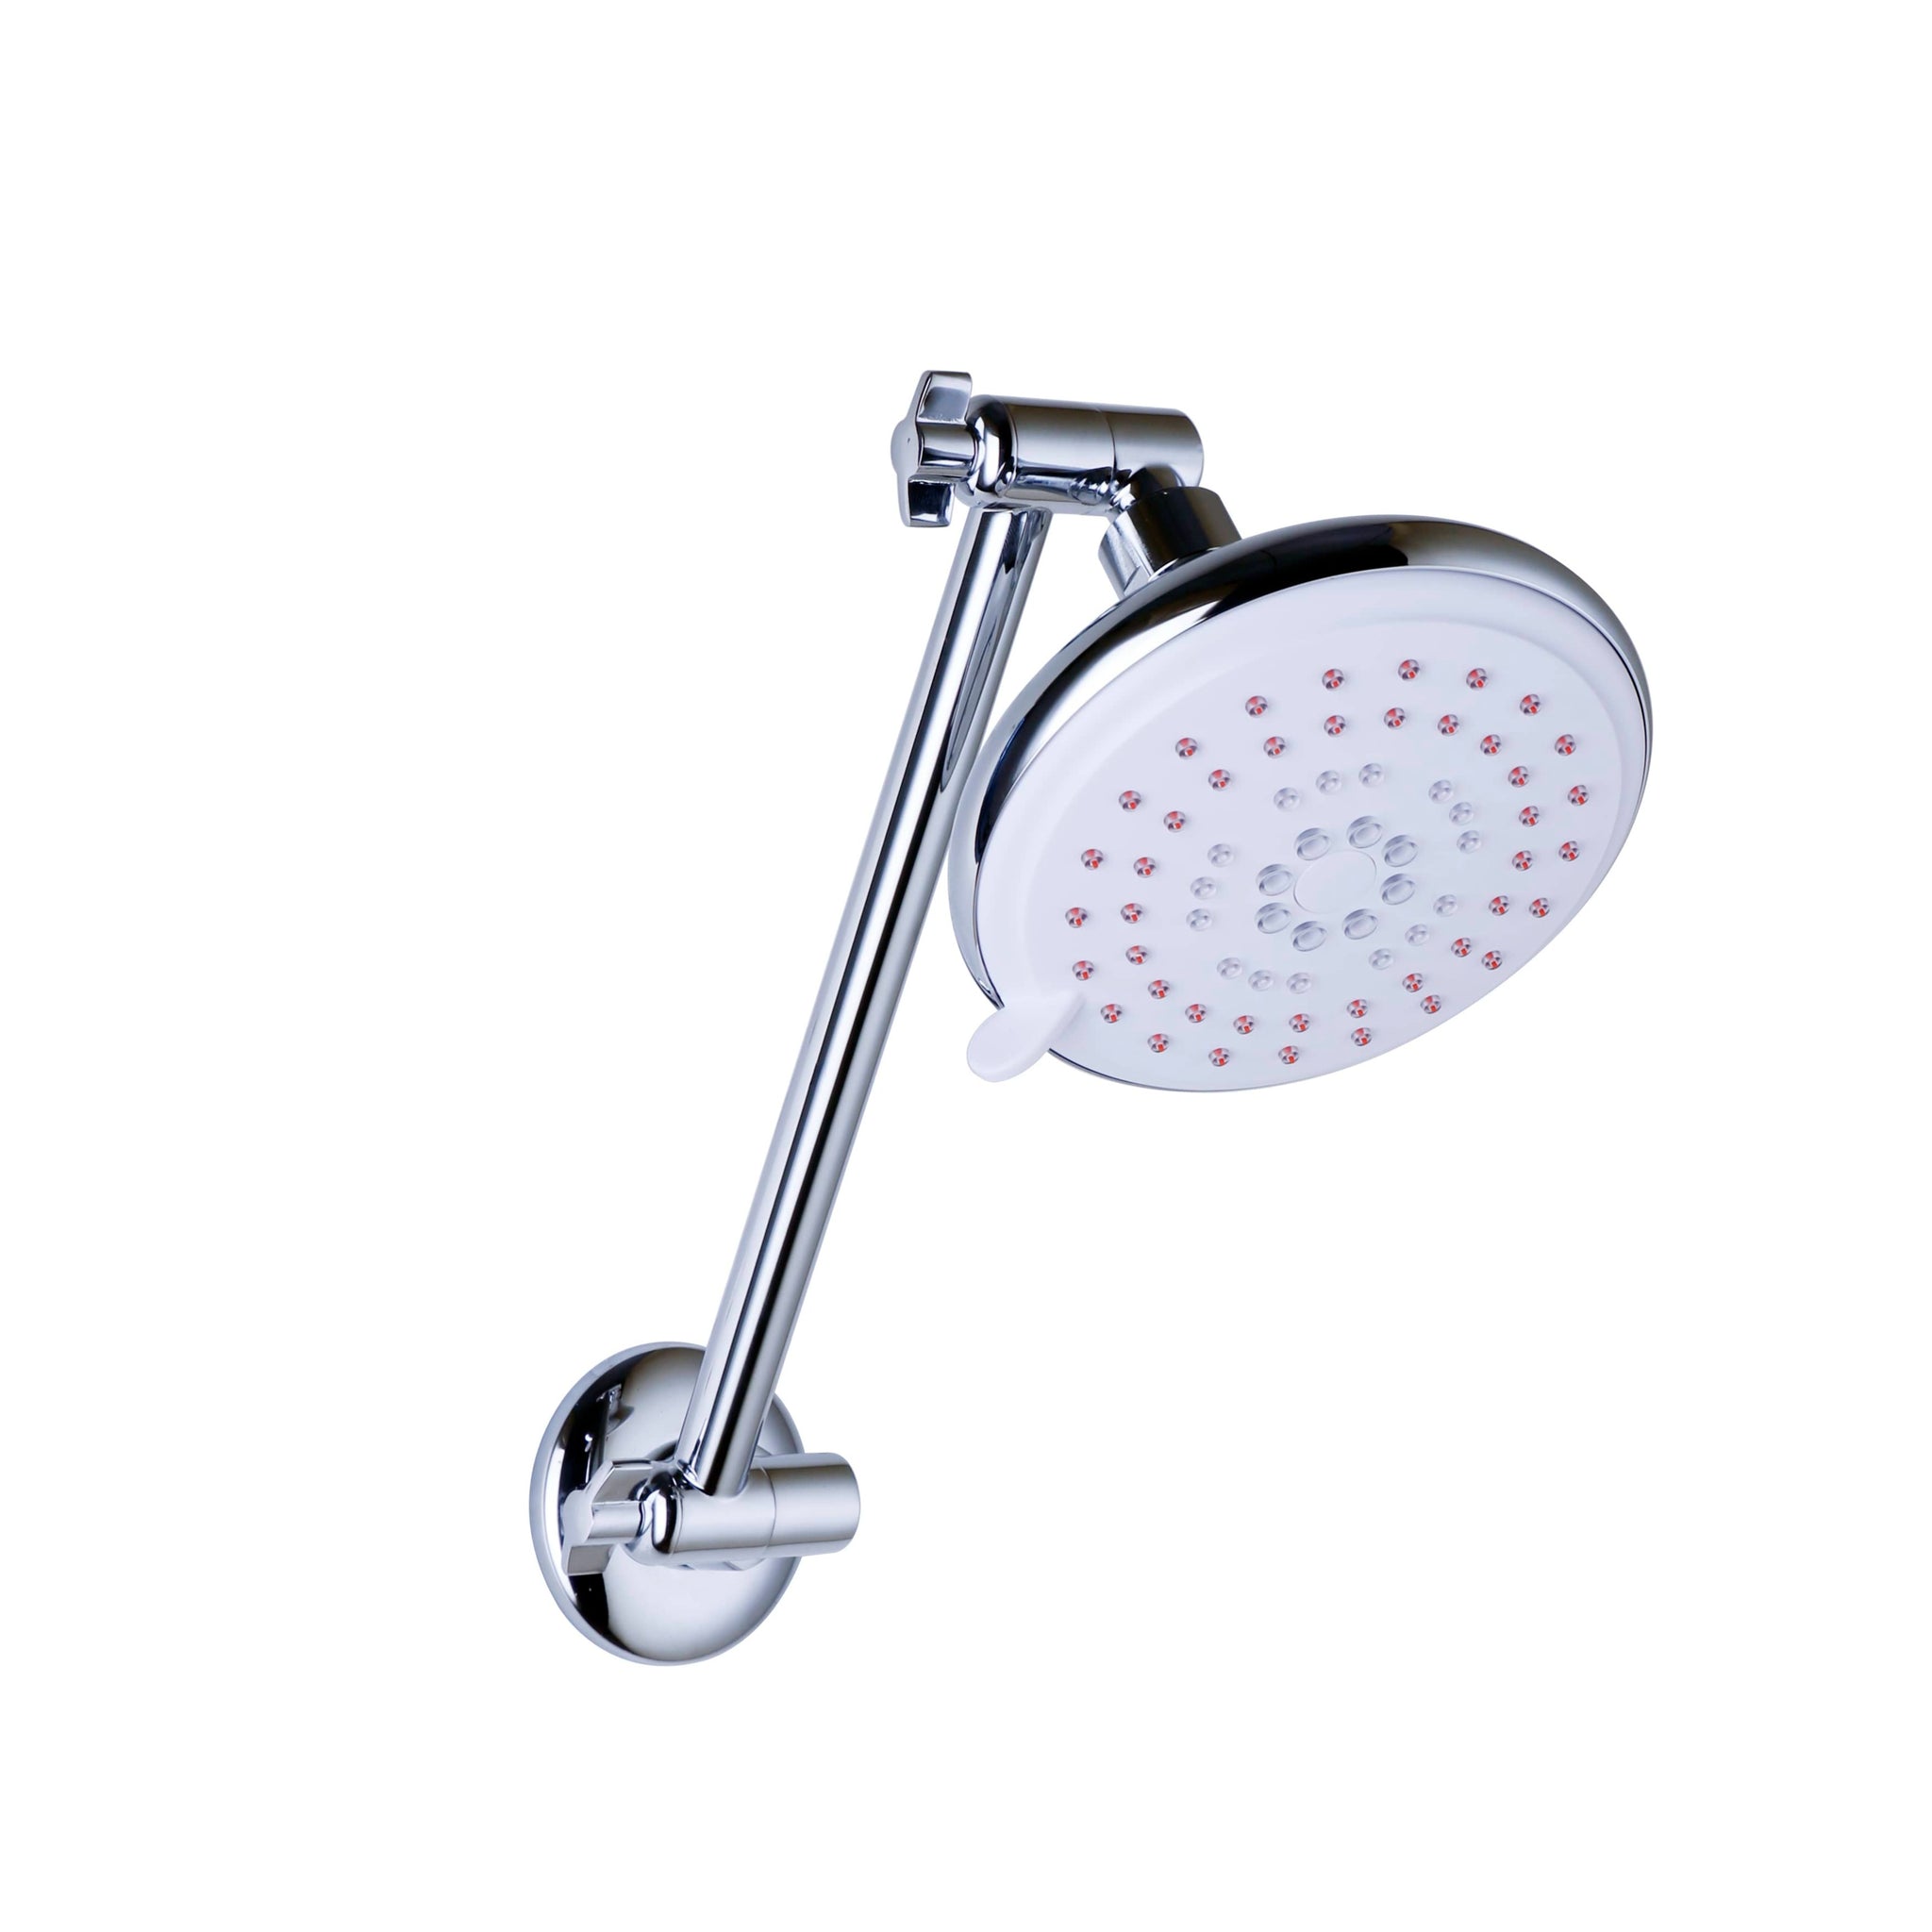 Alldirectional Self-Cleaning Shower Head and Arm Chrome SCS1